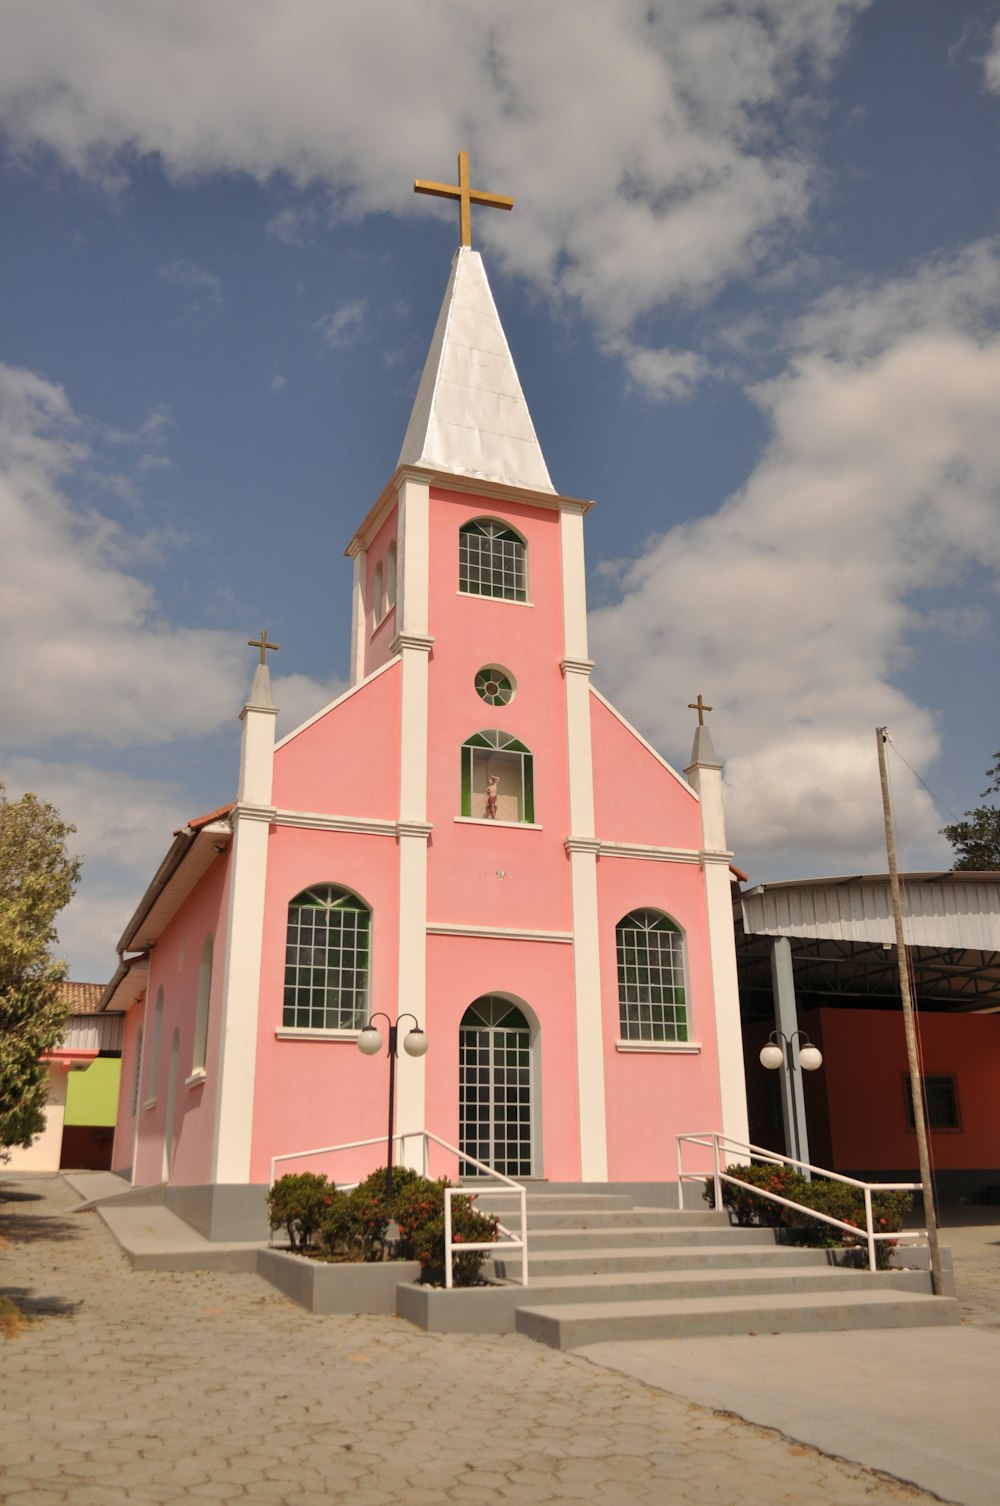 a pink and white church with a cross on top